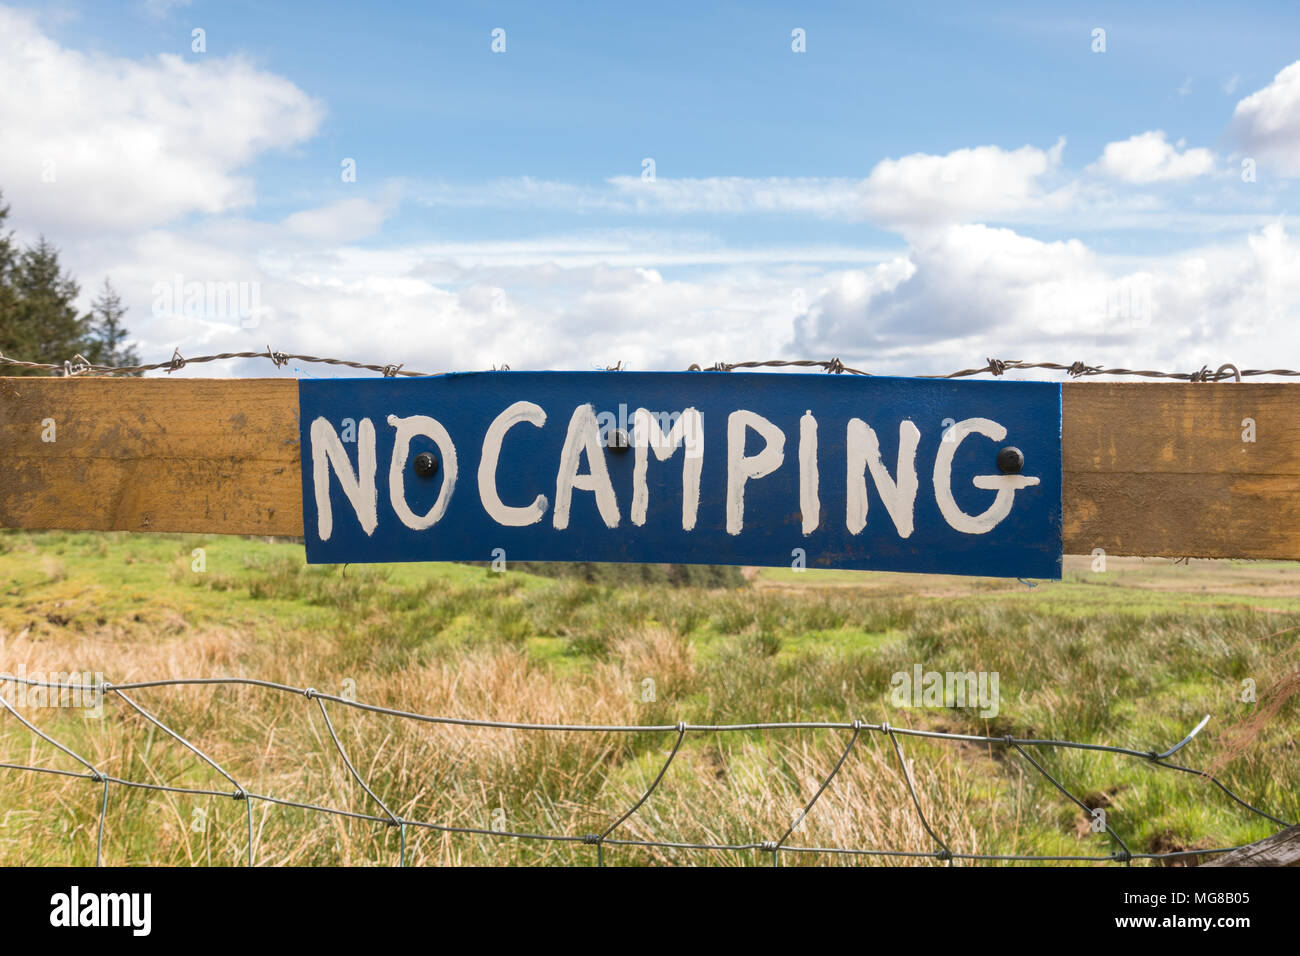 No camping sign on fence in Scotland, UK Stock Photo